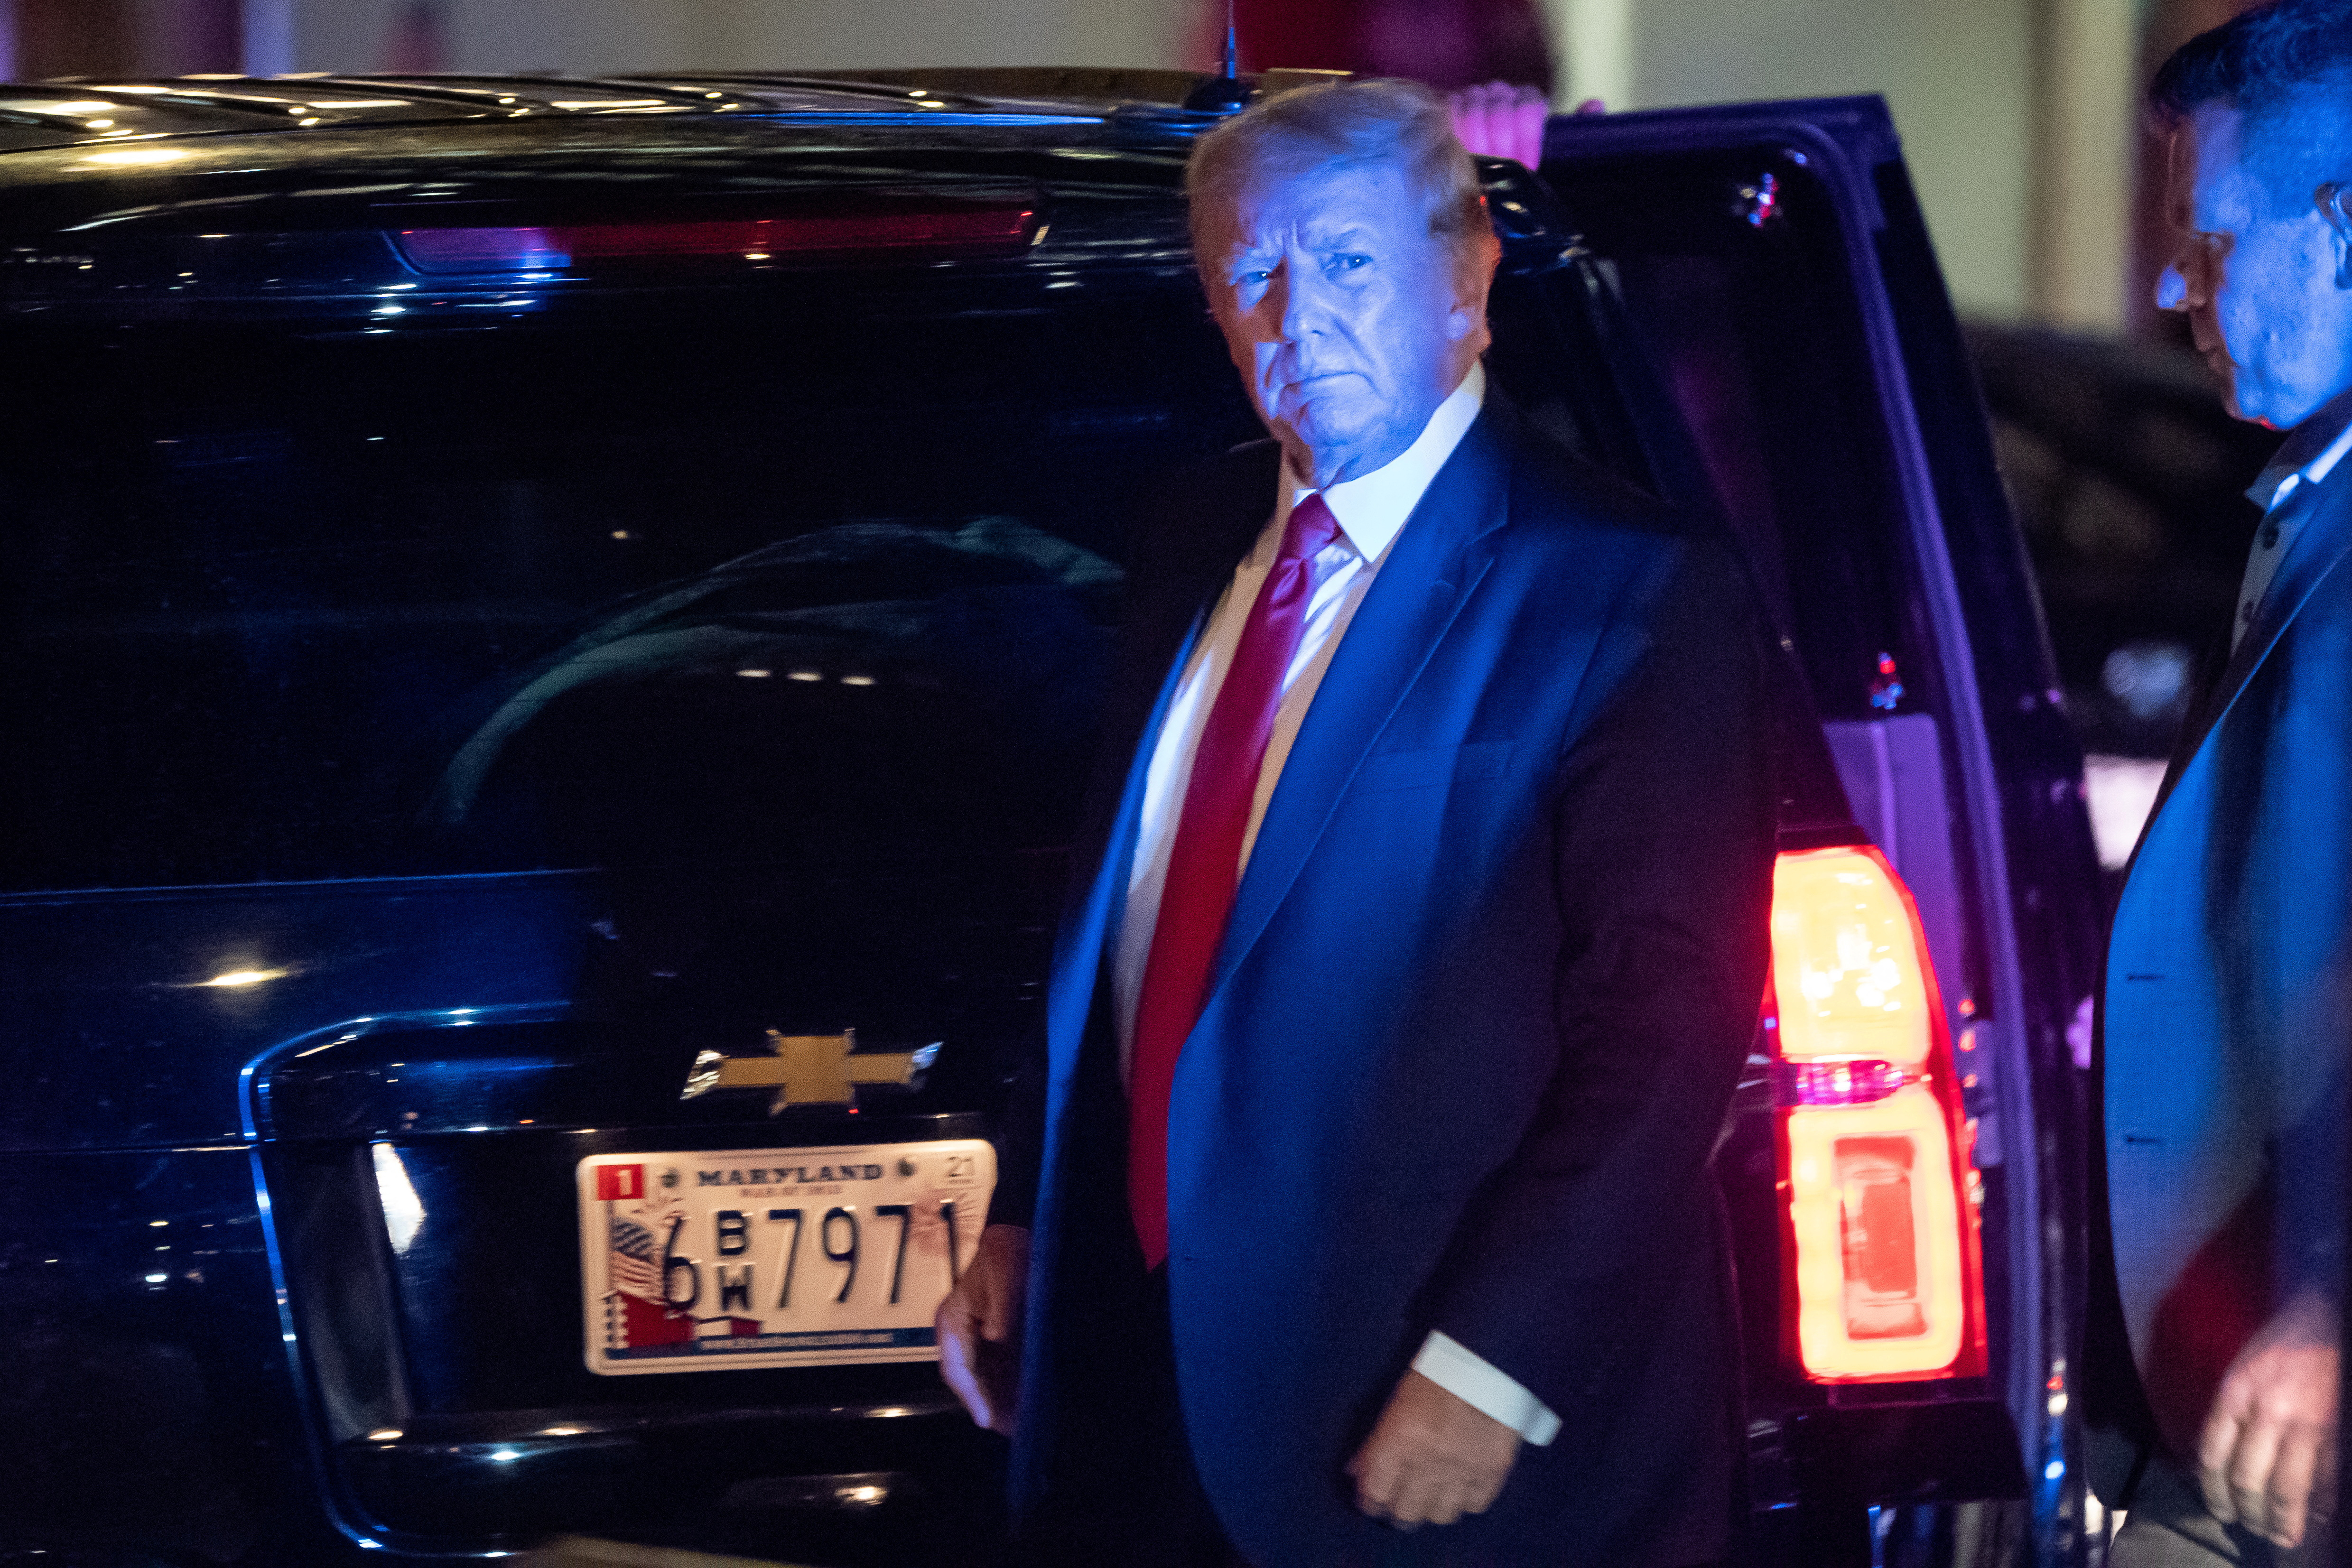 Donald Trump arrives at Trump Tower in New York City